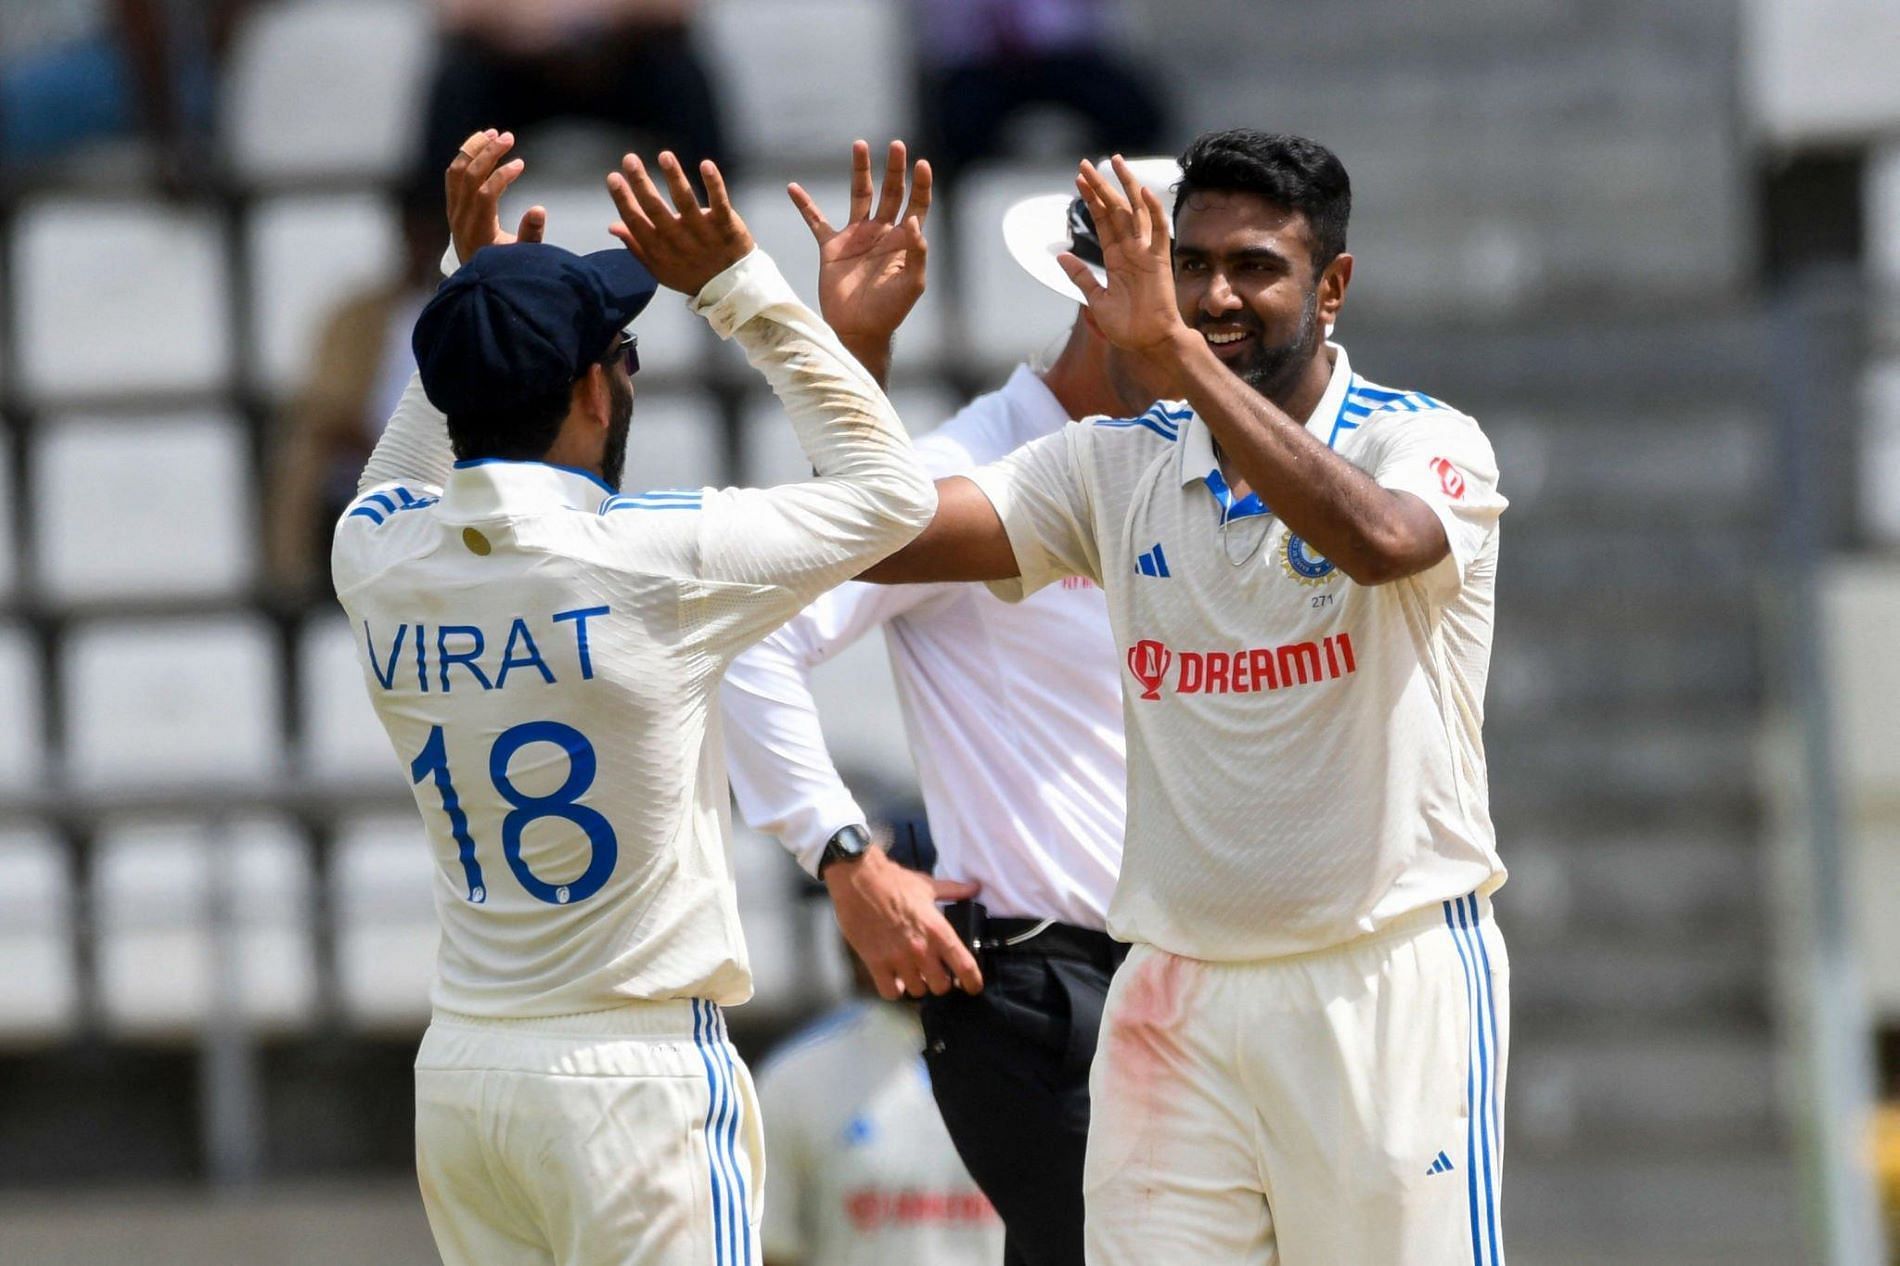 Ravichandran Ashwin lit up Day 1 of the first Test against West Indies